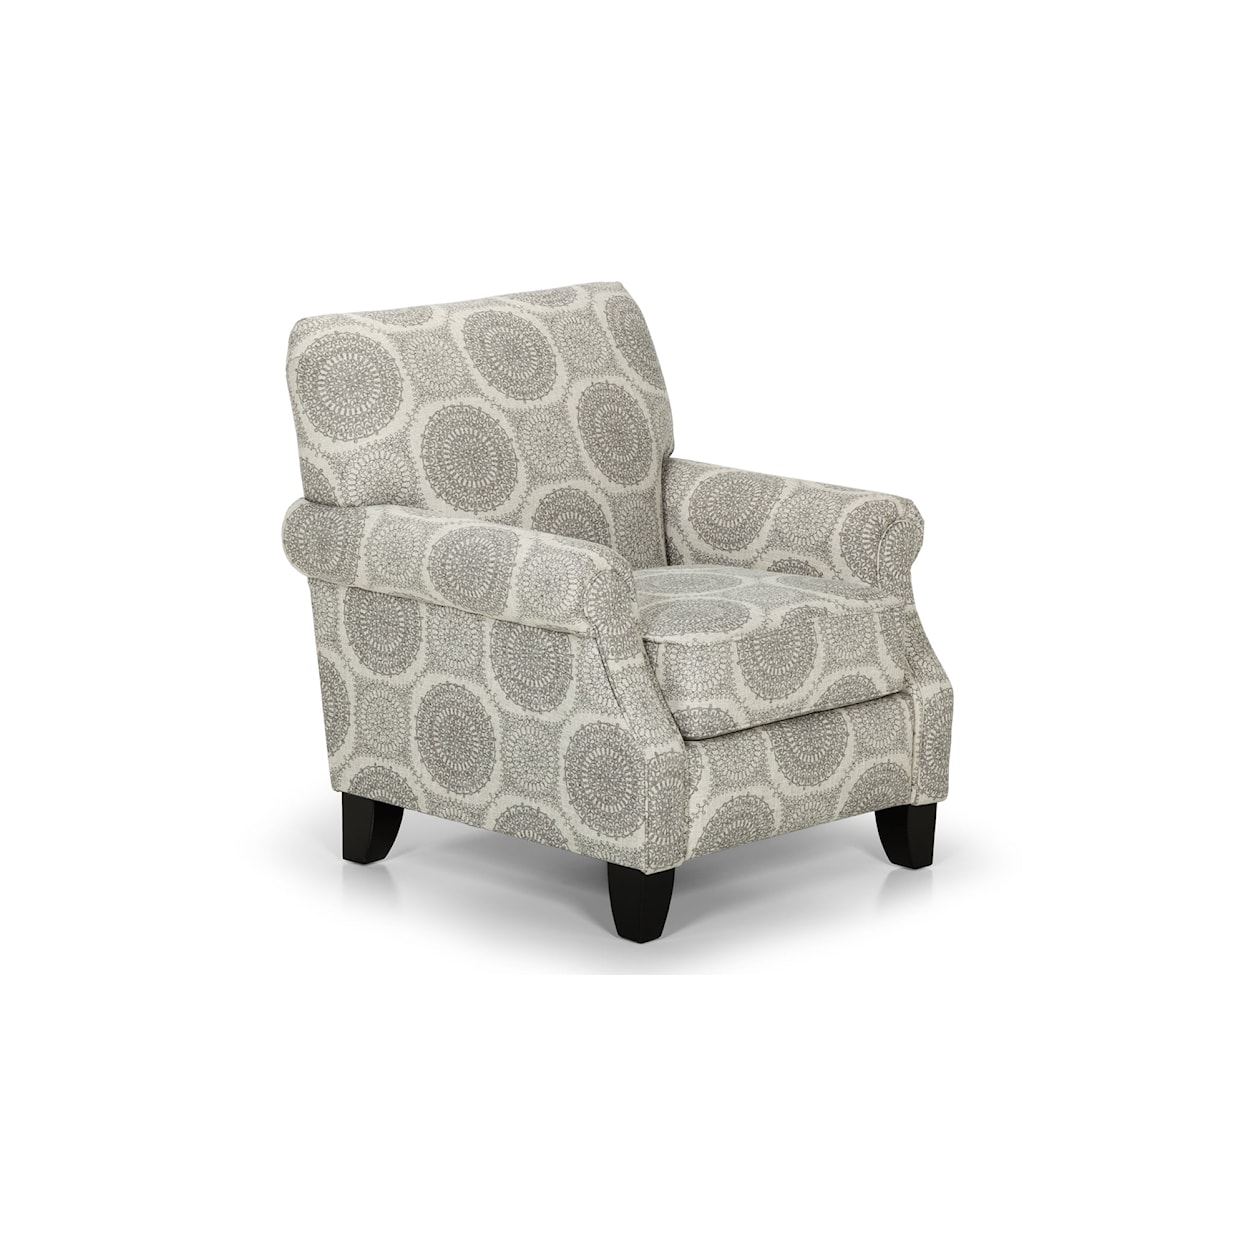 Stanton Accent Chairs and Ottomans Upholstered Accent Chair